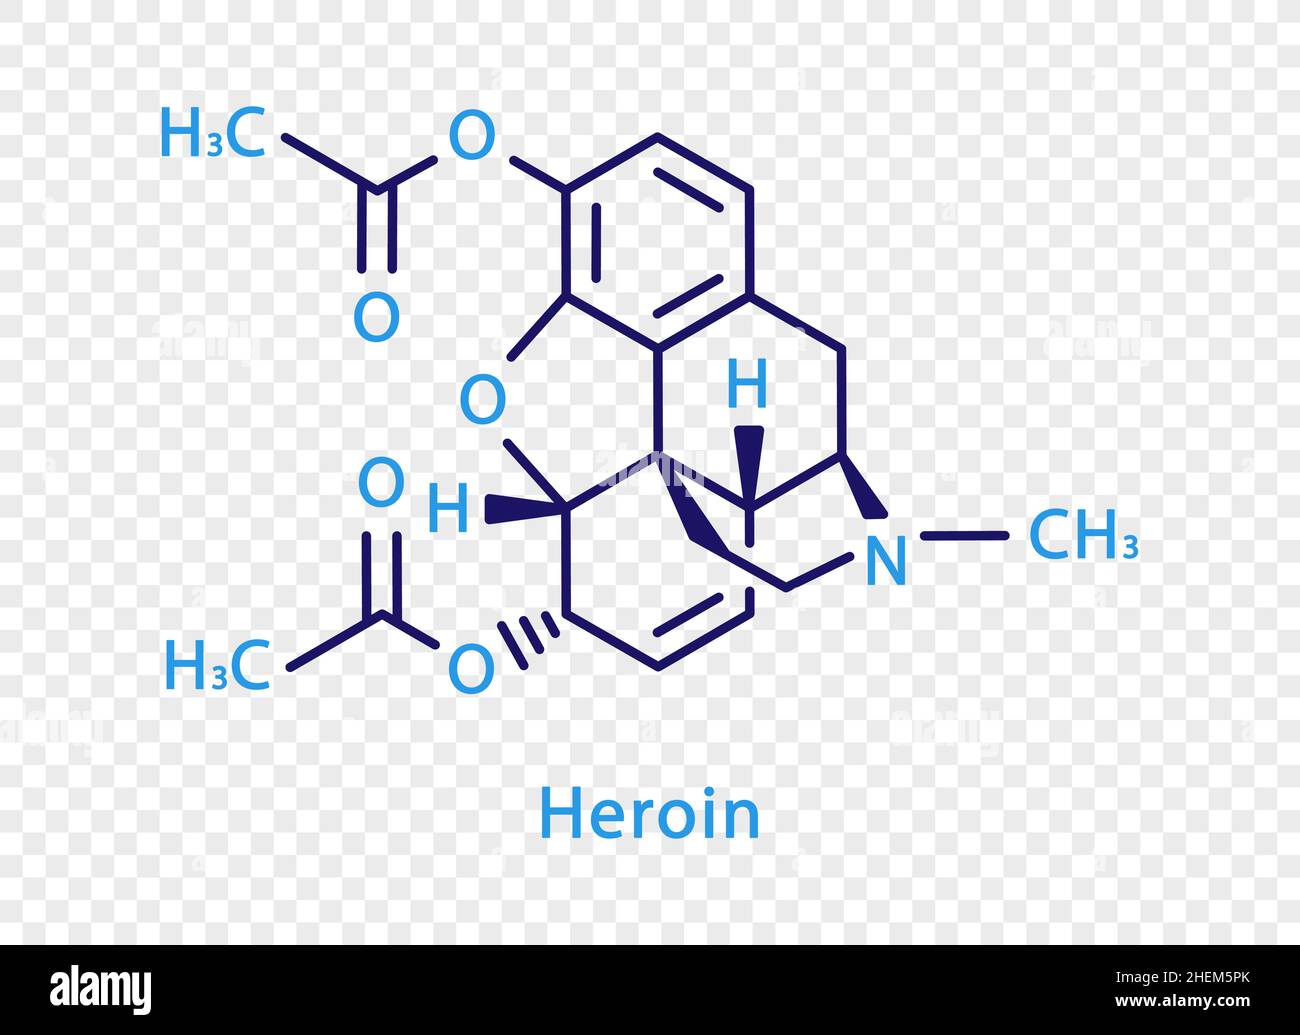 Heroin chemical formula. Heroin structural chemical formula isolated on transparent background. Stock Vector